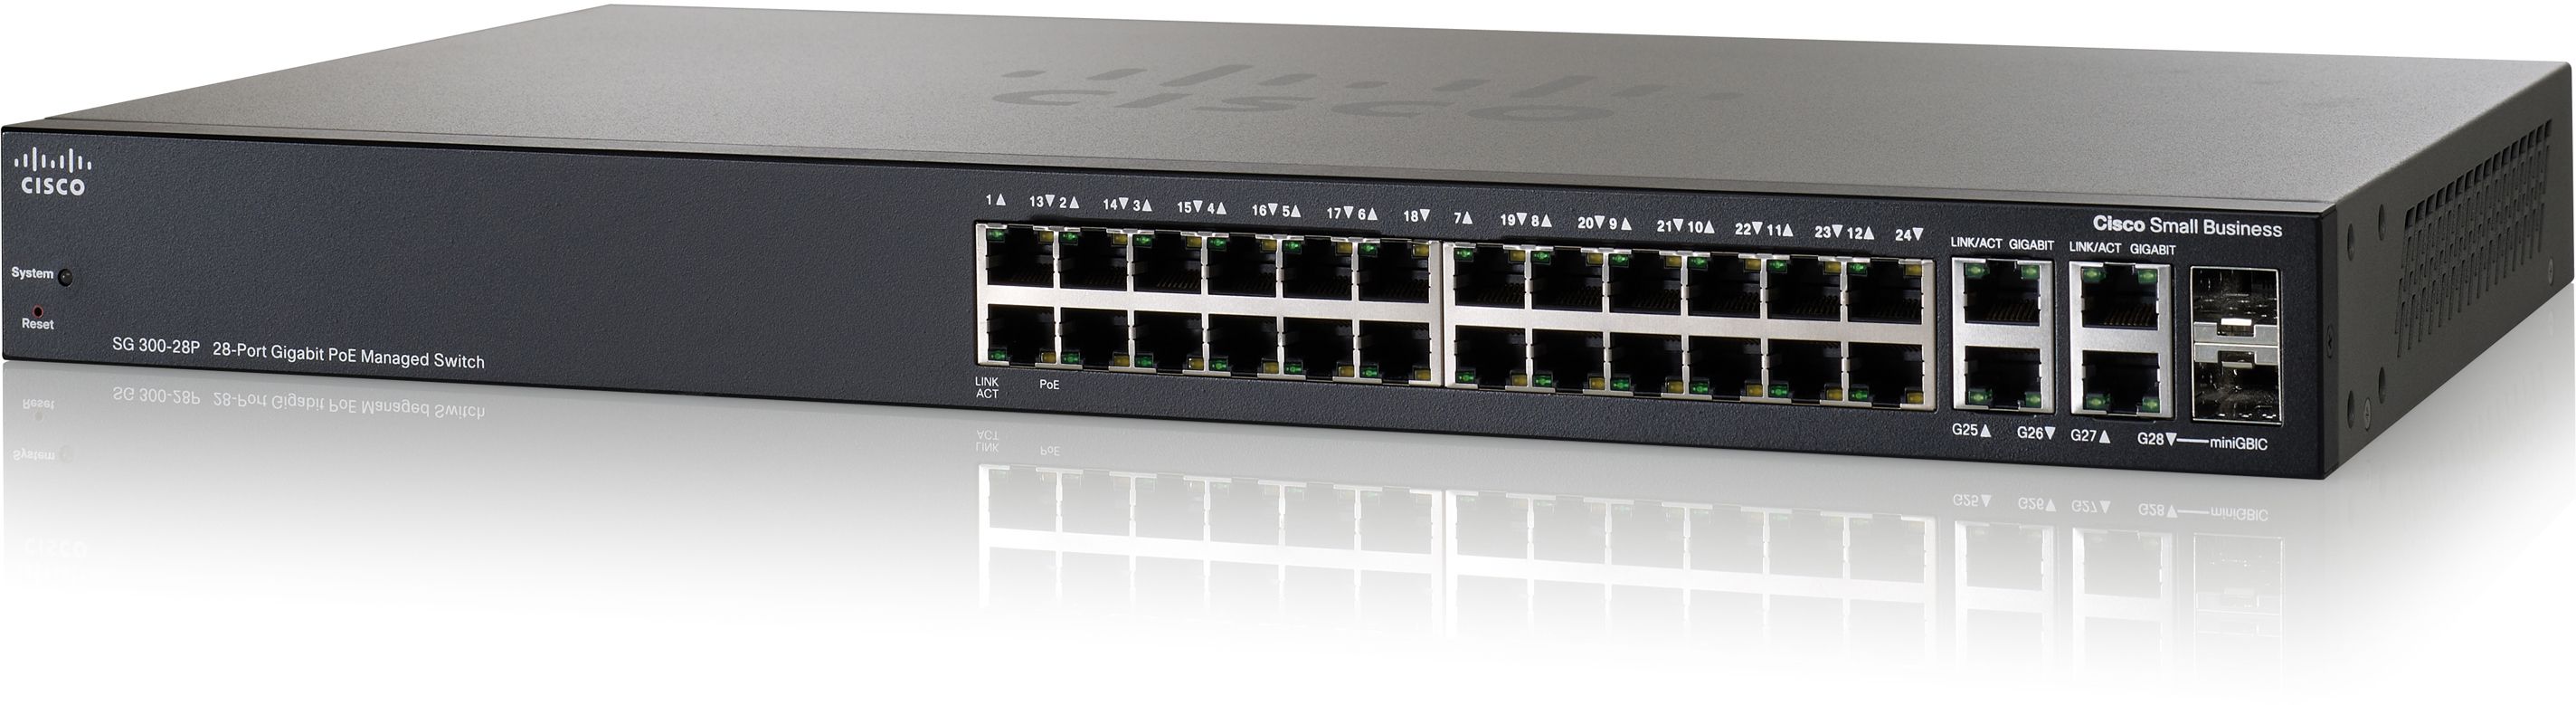 What is a Network Switch & What Are the Features?